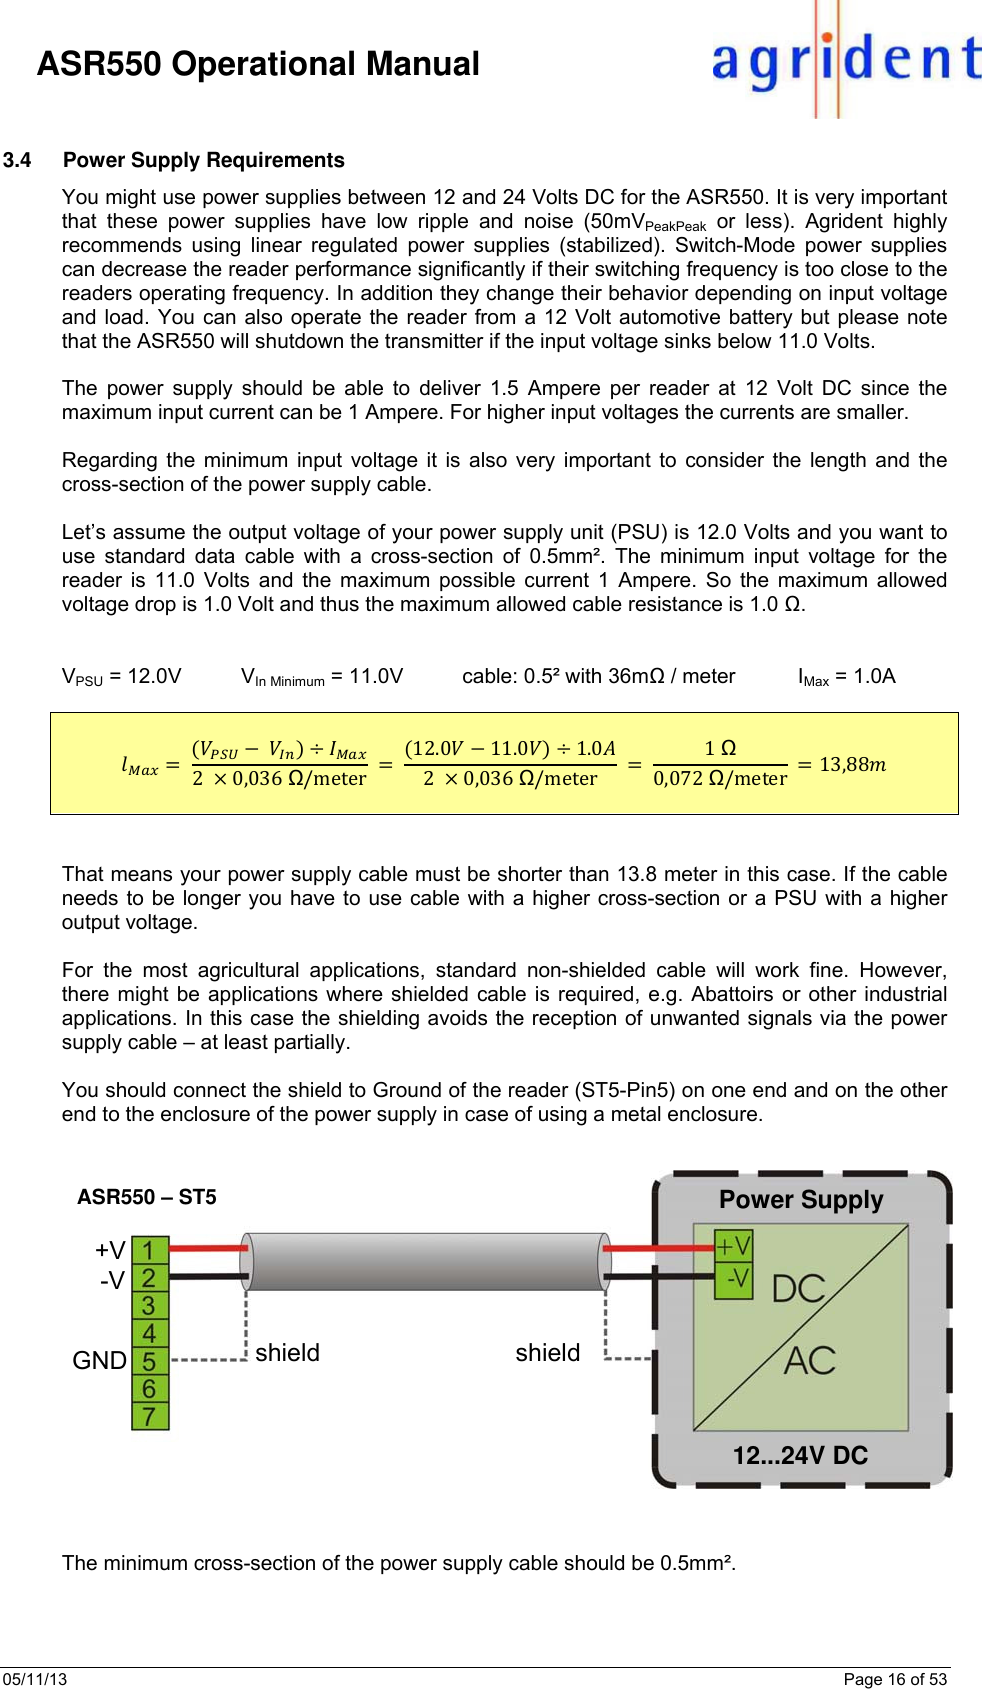 05/11/13    Page 16 of 53     ASR550 Operational Manual  3.4  Power Supply Requirements You might use power supplies between 12 and 24 Volts DC for the ASR550. It is very important that these power supplies have low ripple and noise (50mVPeakPeak or less). Agrident highly recommends using linear regulated power supplies (stabilized). Switch-Mode power supplies can decrease the reader performance significantly if their switching frequency is too close to the readers operating frequency. In addition they change their behavior depending on input voltage and load. You can also operate the reader from a 12 Volt automotive battery but please note that the ASR550 will shutdown the transmitter if the input voltage sinks below 11.0 Volts.  The power supply should be able to deliver 1.5 Ampere per reader at 12 Volt DC since the maximum input current can be 1 Ampere. For higher input voltages the currents are smaller.  Regarding the minimum input voltage it is also very important to consider the length and the cross-section of the power supply cable.   Let’s assume the output voltage of your power supply unit (PSU) is 12.0 Volts and you want to use standard data cable with a cross-section of 0.5mm². The minimum input voltage for the reader is 11.0 Volts and the maximum possible current 1 Ampere. So the maximum allowed voltage drop is 1.0 Volt and thus the maximum allowed cable resistance is 1.0 Ω.    VPSU = 12.0V     VIn Minimum = 11.0V     cable: 0.5² with 36mΩ / meter           IMax = 1.0A     2  0,036Ω/meter 12.0  11.0  1.02  0,036 Ω/meter 1Ω0,072 Ω/meter   13,88    That means your power supply cable must be shorter than 13.8 meter in this case. If the cable needs to be longer you have to use cable with a higher cross-section or a PSU with a higher output voltage.  For the most agricultural applications, standard non-shielded cable will work fine. However, there might be applications where shielded cable is required, e.g. Abattoirs or other industrial applications. In this case the shielding avoids the reception of unwanted signals via the power supply cable – at least partially.  You should connect the shield to Ground of the reader (ST5-Pin5) on one end and on the other end to the enclosure of the power supply in case of using a metal enclosure.     The minimum cross-section of the power supply cable should be 0.5mm².    ASR550 – ST5 +V -V shield shield 12...24V DC Power Supply GND 